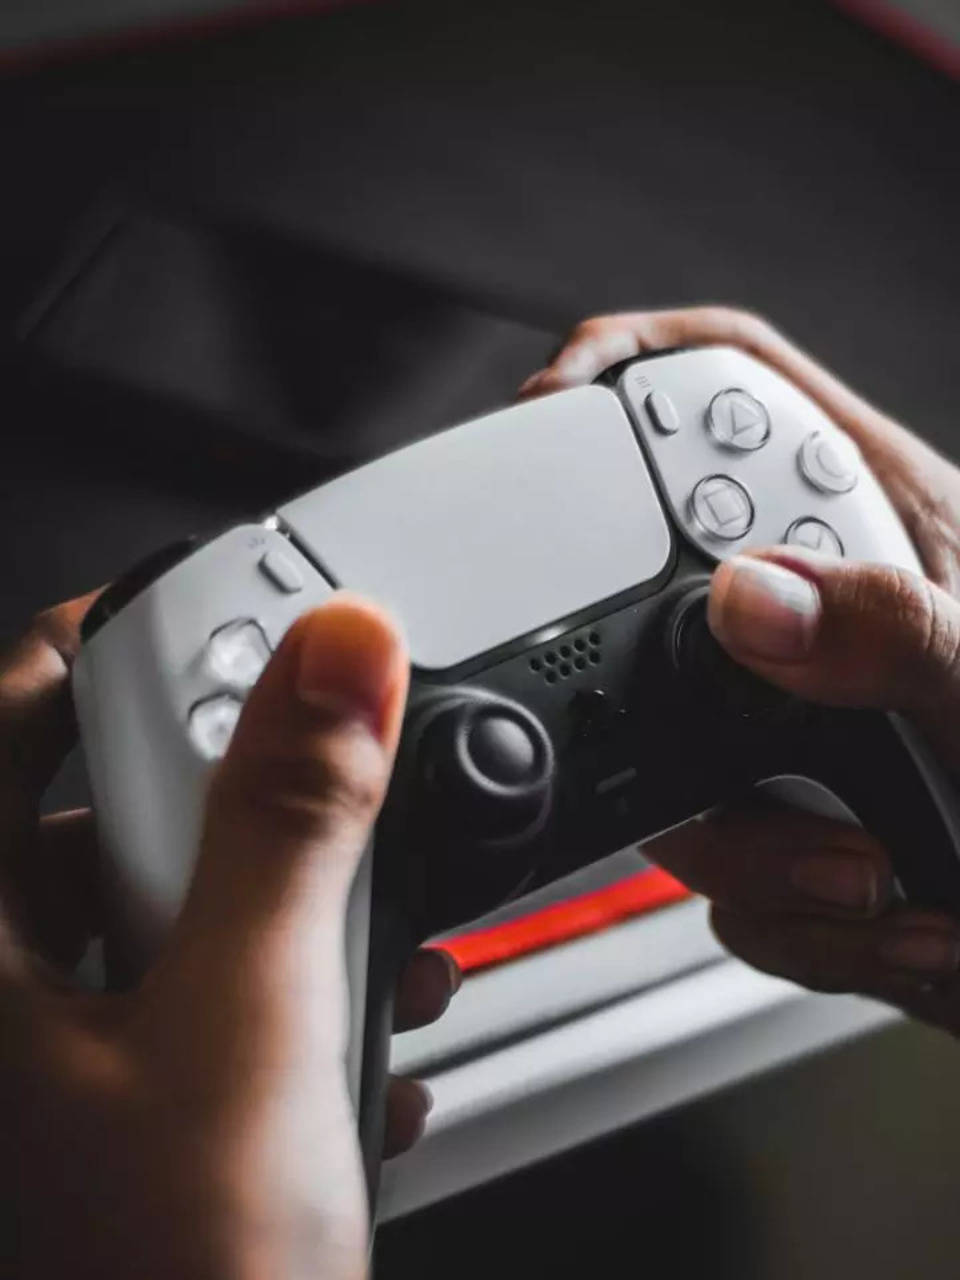 Best Game Consoles In India: Top Picks - Times of India (December